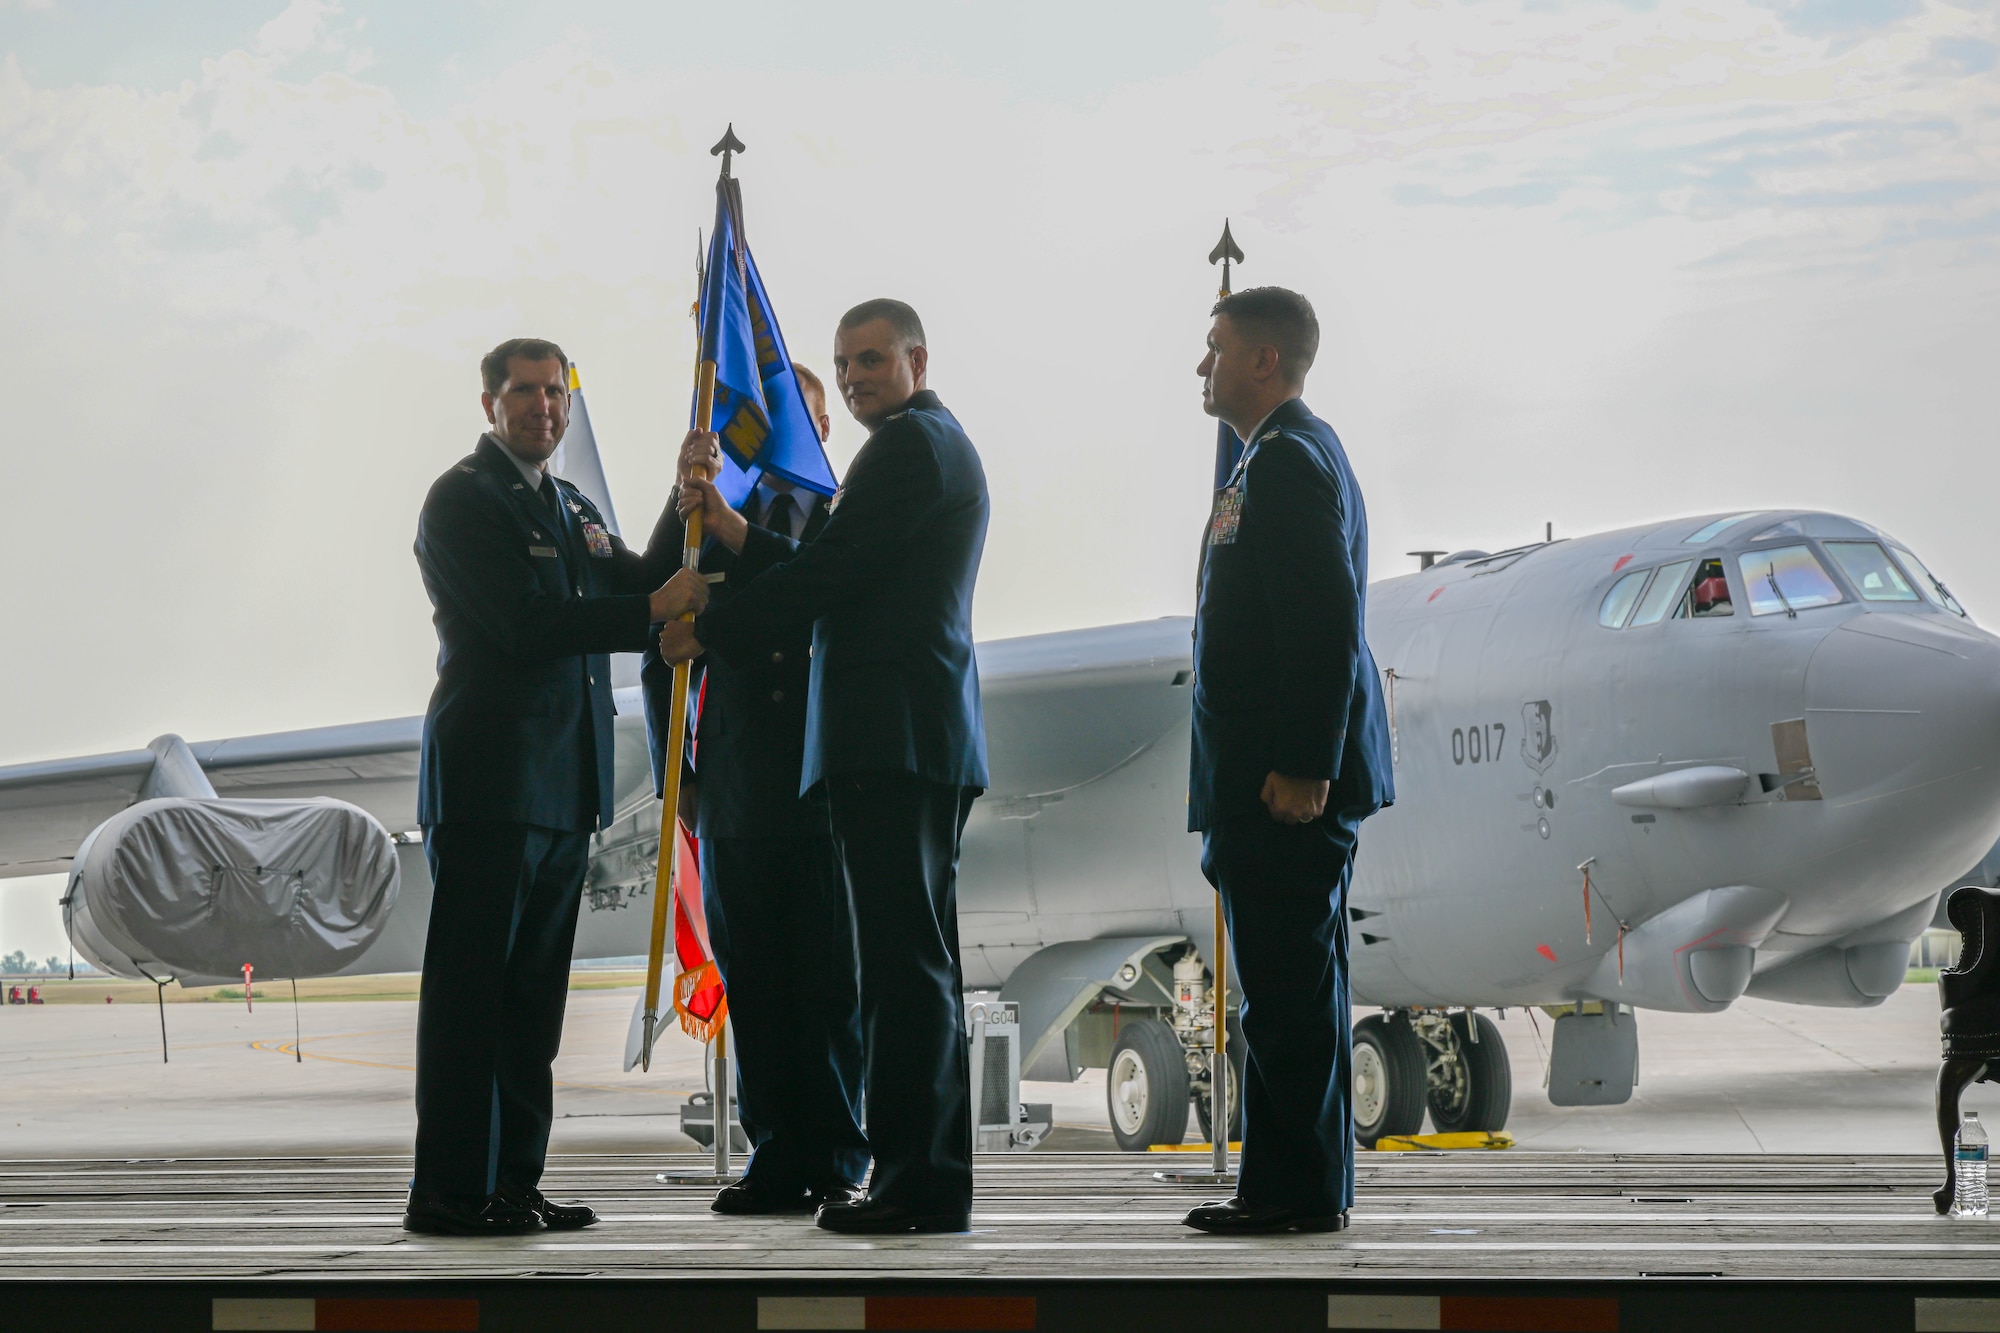 U.S. Air Force Col. Joel Dixon, outgoing 5th Medical Group (MDG) commander, passes the guidon to U.S Air Force Col. Daniel Hoadley, 5th Bomb Wing commander, during the 5th MDG change of command ceremony at Minot Air Force Base, North Dakota, Aug. 18, 2023. Dixon served as commander of the 5th MDG since June 2021. (U.S. Air Force photo by Airman 1st Class Kyle Wilson)